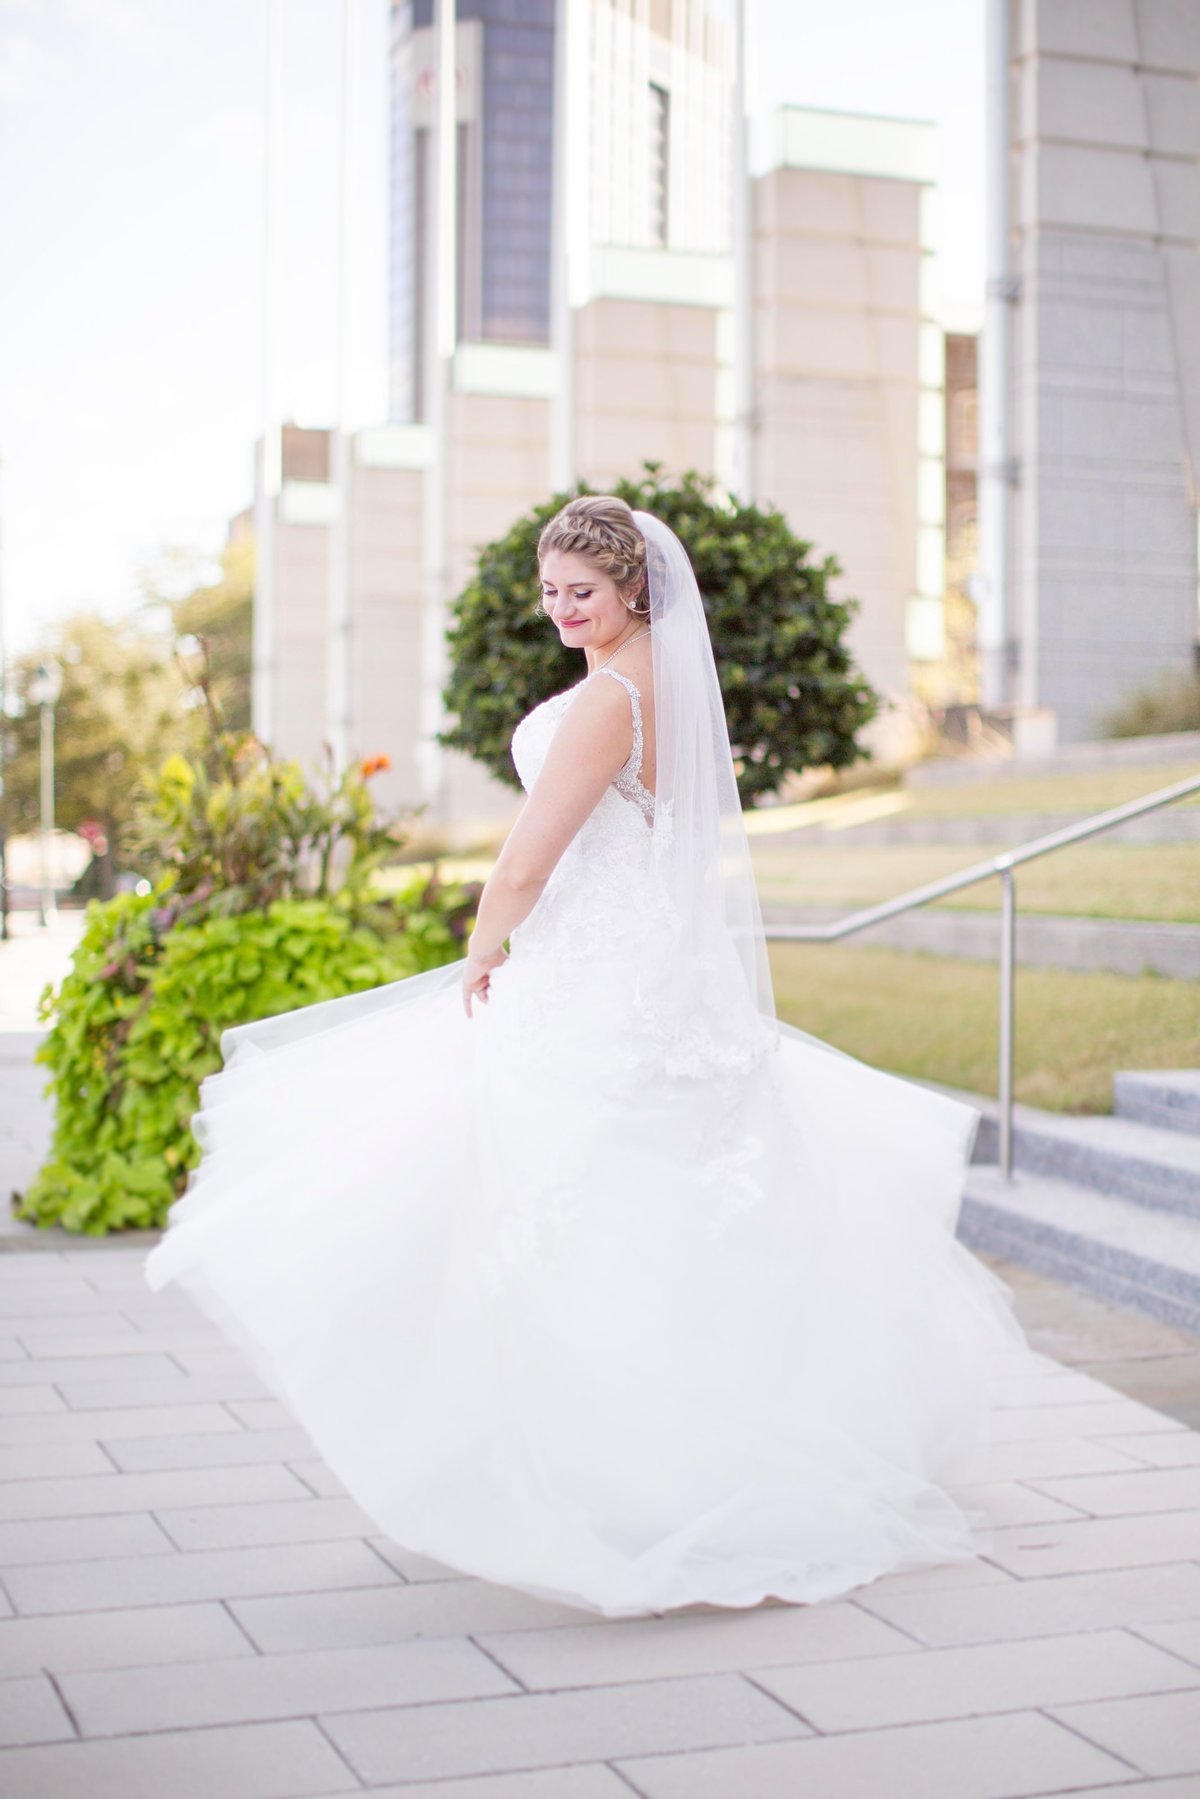 The bride twirls in her dress during the bridal session at The Battle House Hotel in Mobile, Alabama.